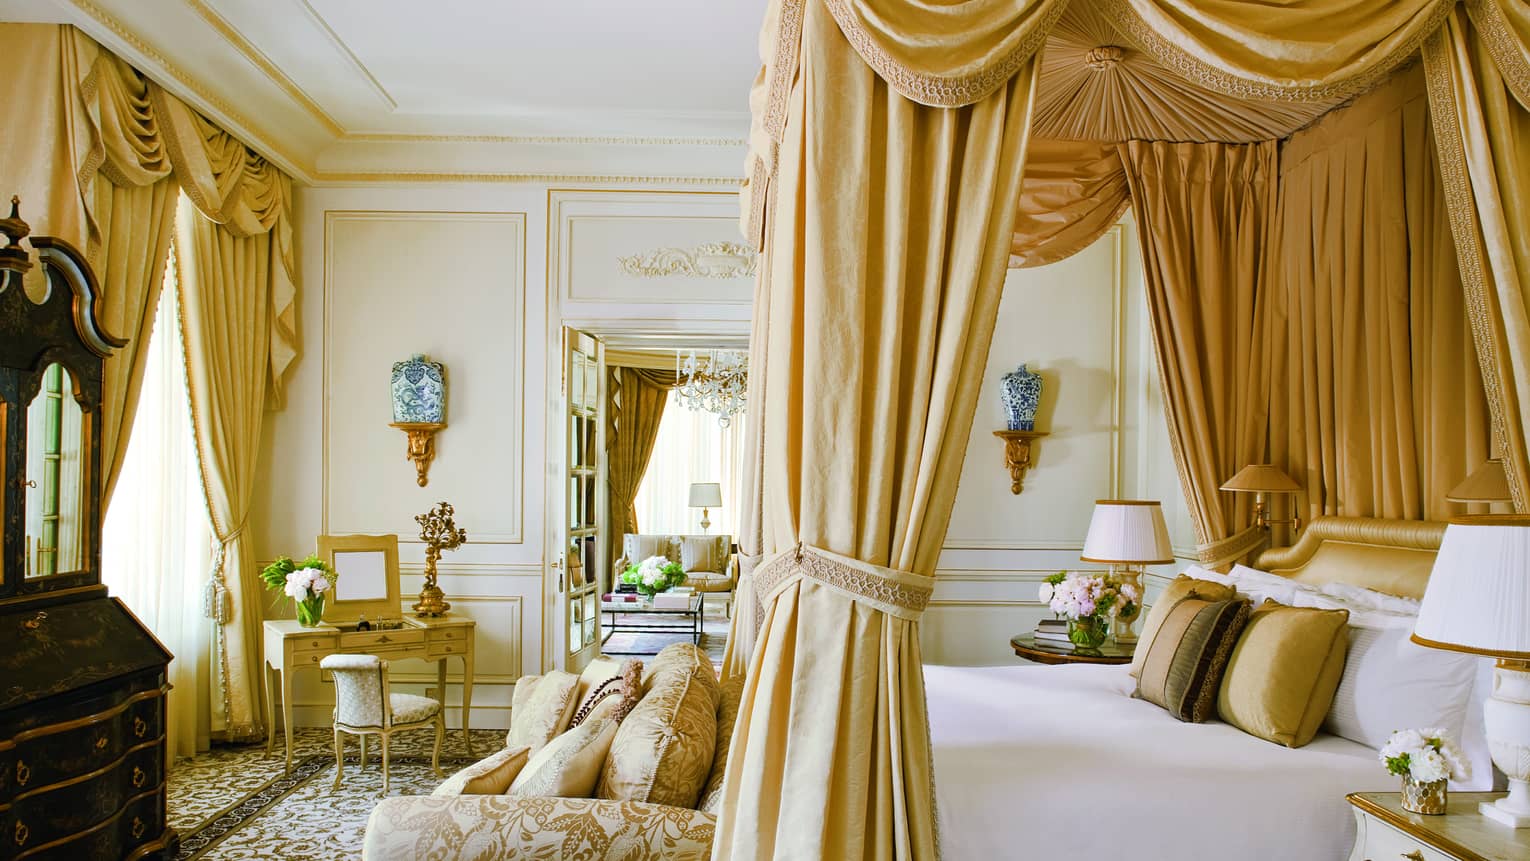 Elaborate Royal Suite, gold upholstery, canopy bed and curtains